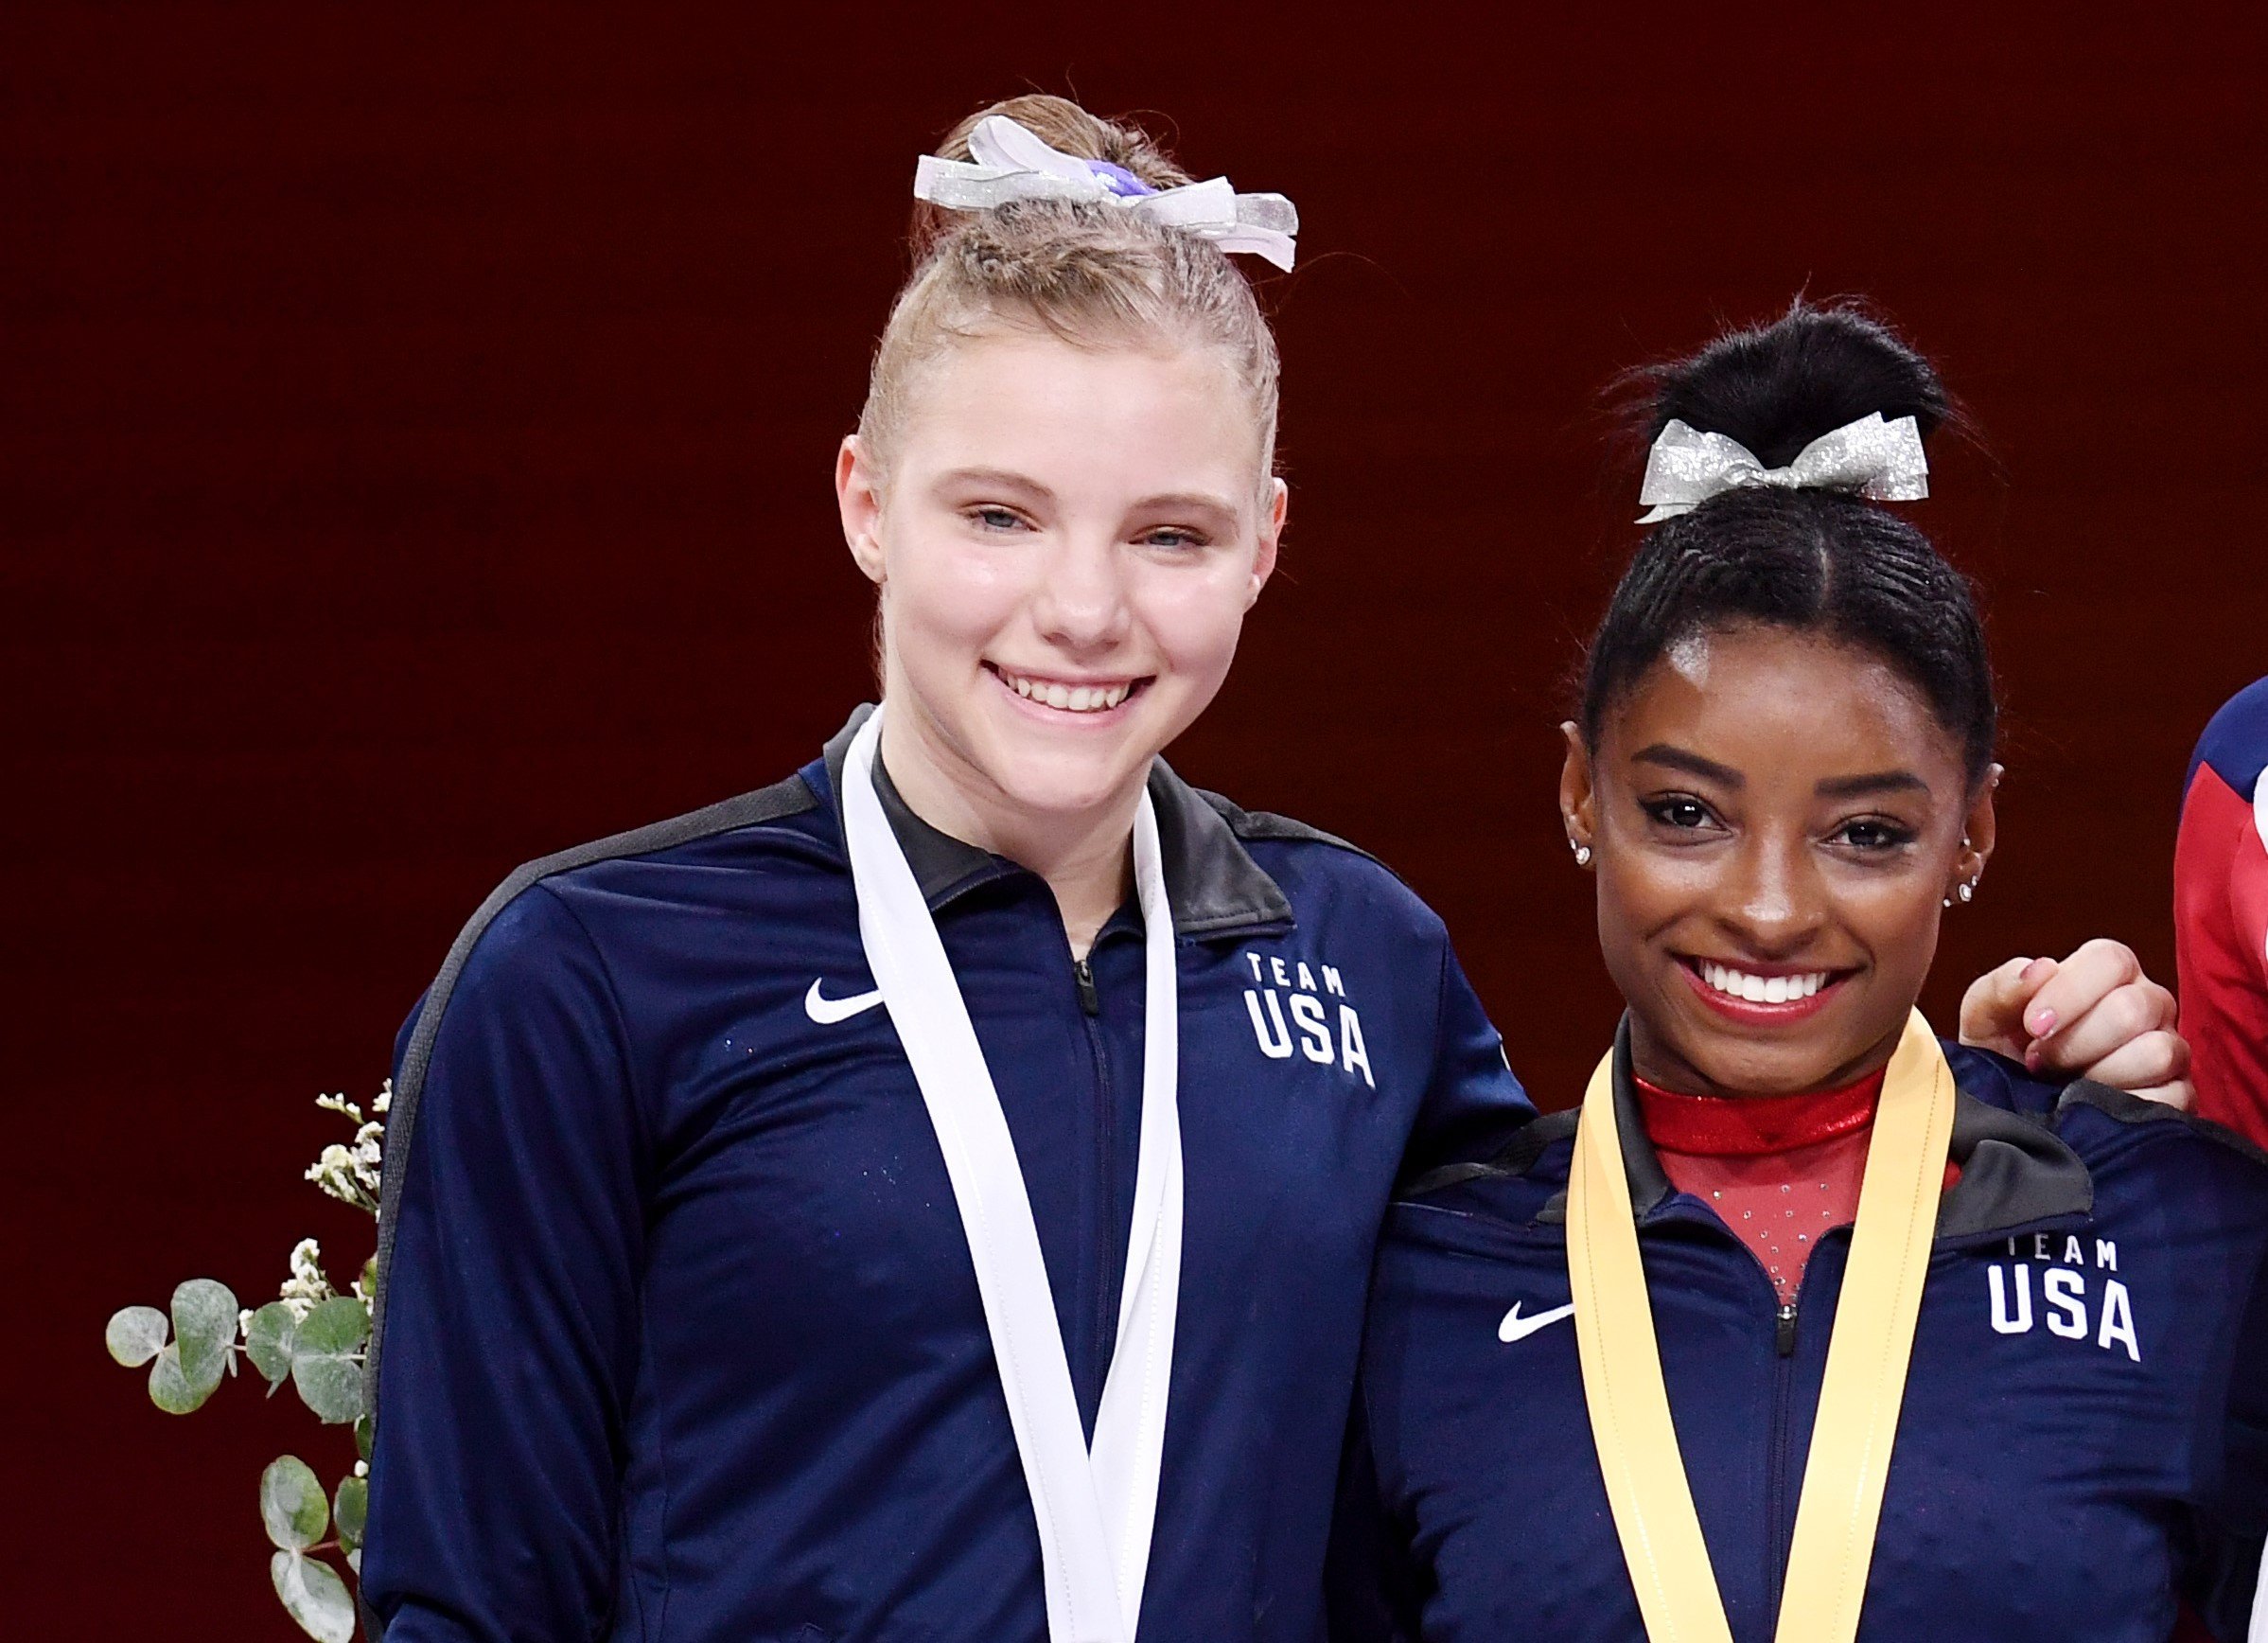 Jade Carey and Simone Biles pose together on the podium with medals at FIG Artistic Gymnastics World Championships